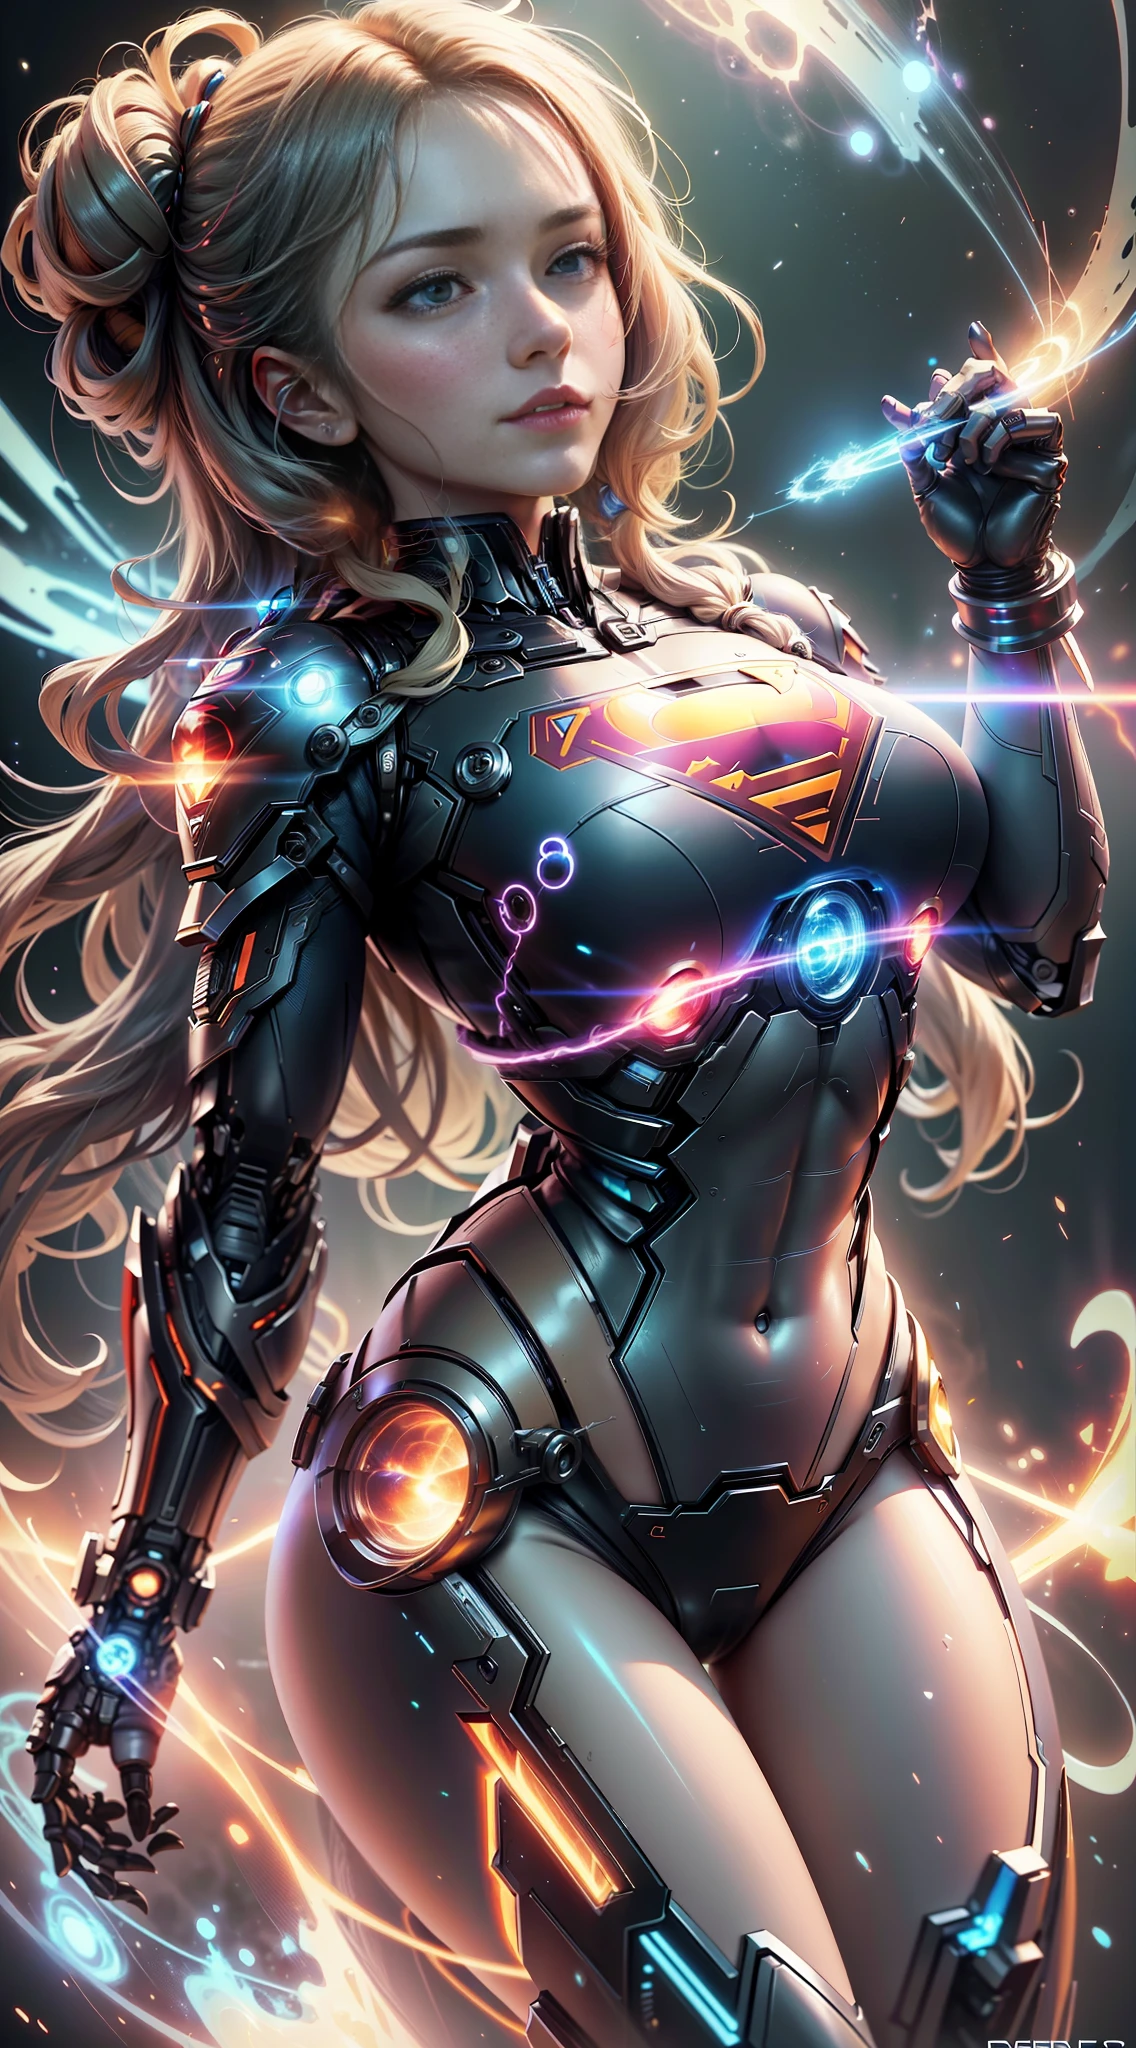 ((Best quality)), ((Supergirl's masterpiece)), (highly detailed:1.3), 3D, beautiful, (cyberpunk:1.2), in space, nebulous, holding_weapon, laser, (1Female Mecha:1.3), sexy body, facing the audience, bright blue eyes, full body, blonde, (flying, descending, dynamic, motion blur: 1.4), (huge wings of wicks: 1.6), looking up, glowing_eyes, mecha, panorama, background is earth,  nebula, space, particles, Reality, HDR (High Dynamic Range), Ray Tracing, NVIDIA RTX, Super Resolution, Unreal 5, Subsurface Scattering, PBR Textures, Post-Processing, Anisotropic Filtering, Depth of Field, Maximum Clarity and Clarity, Multilayer Textures, Albedo and Specular Maps, Surface Shading, Accurate Simulation of Light-Material Interaction, Perfect Proportions, Octane Render, Two-Tone Lighting, Large Aperture, Low ISO,  white balance, rule of thirds, 8K RAW, efficient sub-pixel, sub-pixel volume product, (best quality), (Japanese: 0.5), (Korean: 0.8), (Liu Yi Fei: 1.5) long hair, (big chest: 1.2) wearing superman's S on the chest. --auto --s2